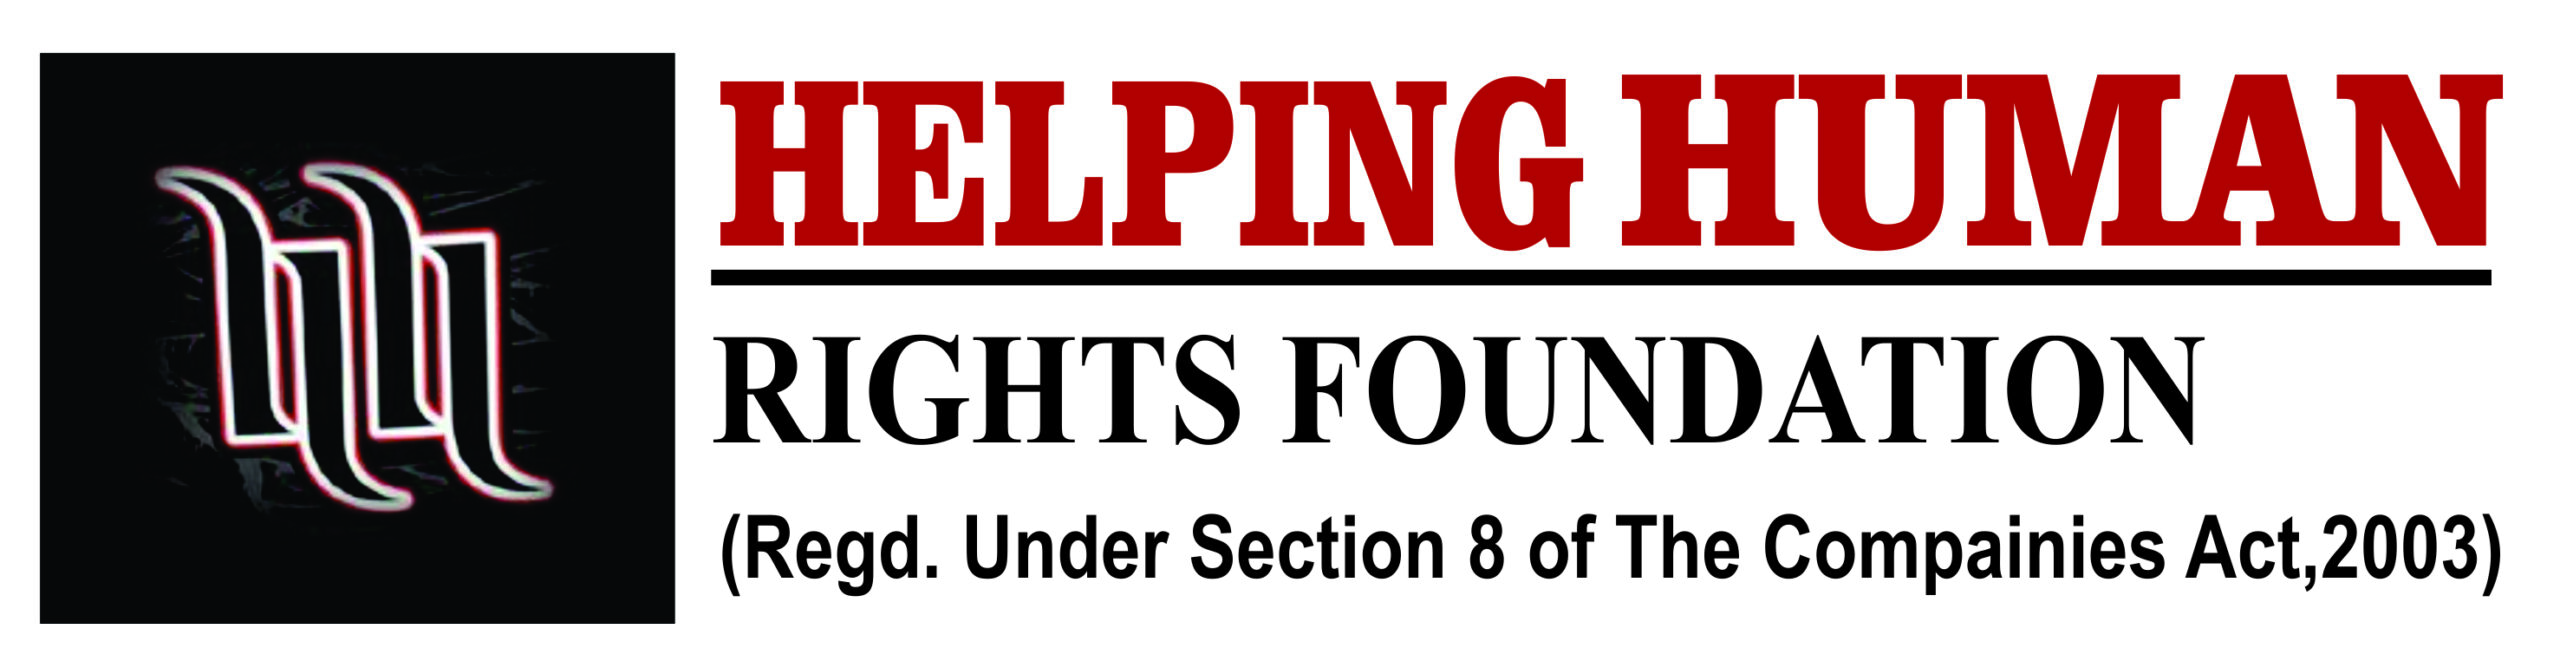 Helping-Human-Rights-Foundation